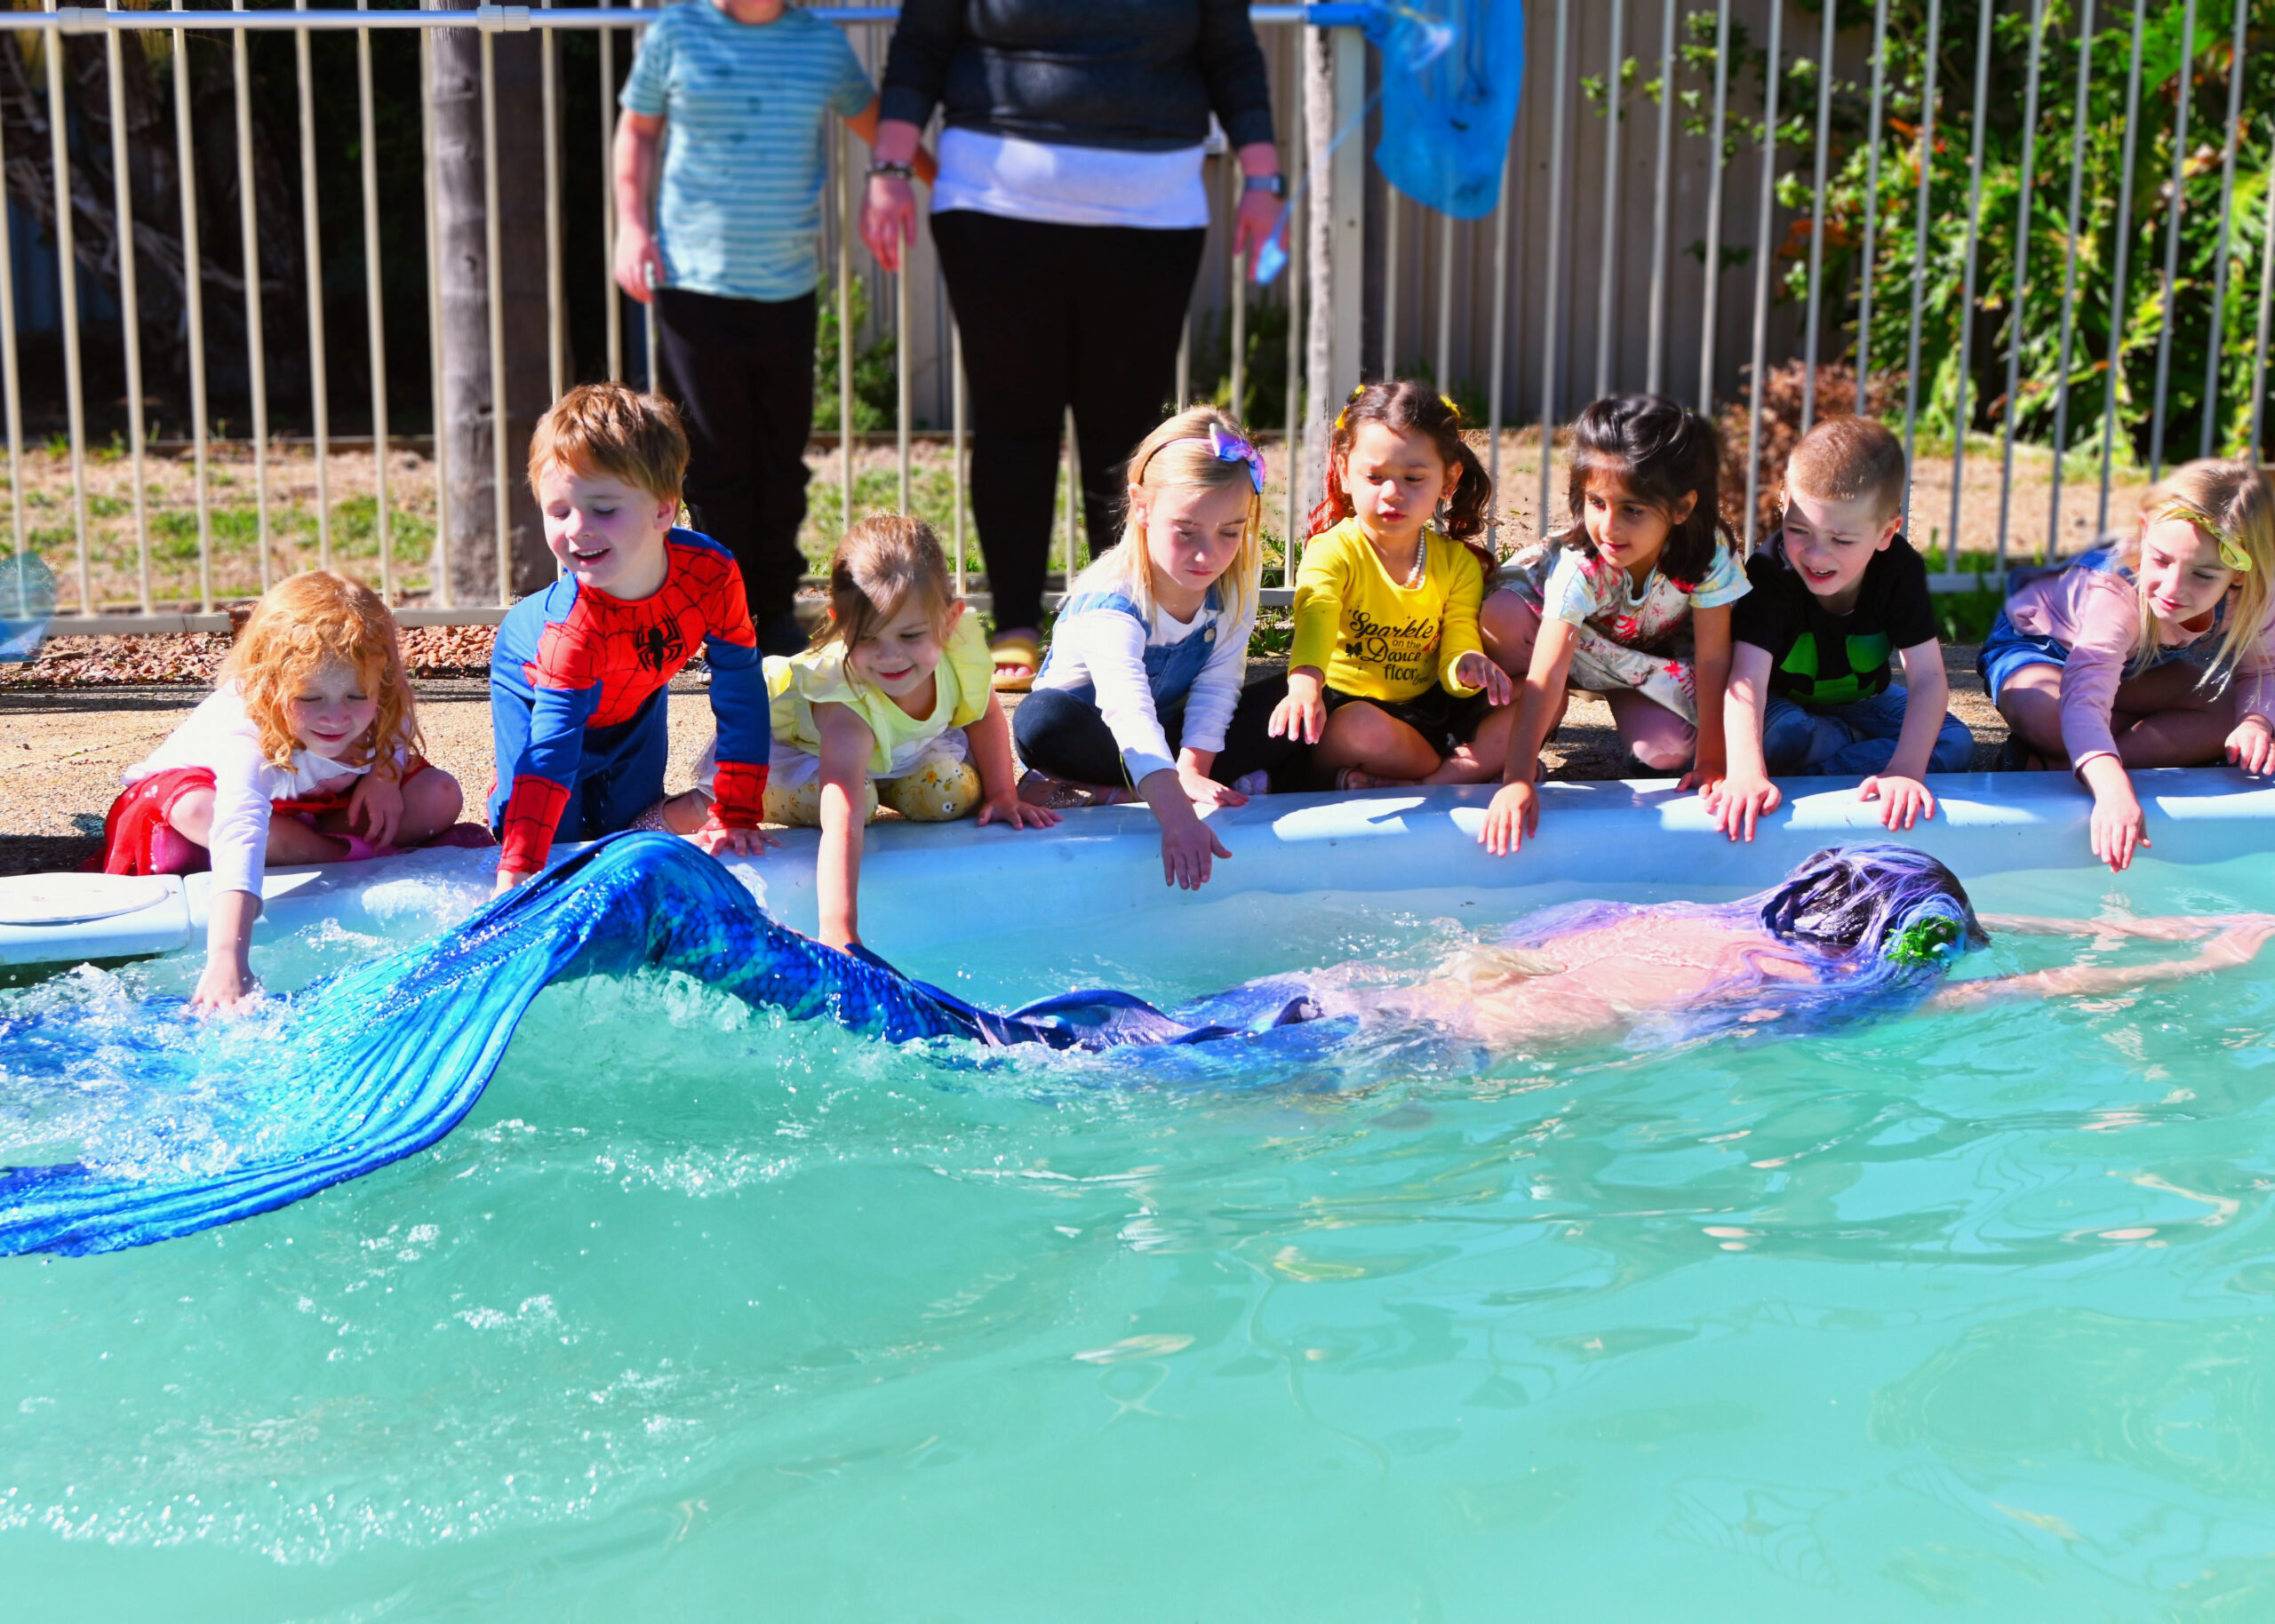 A mermaid performer swimming in a pool at a children's party